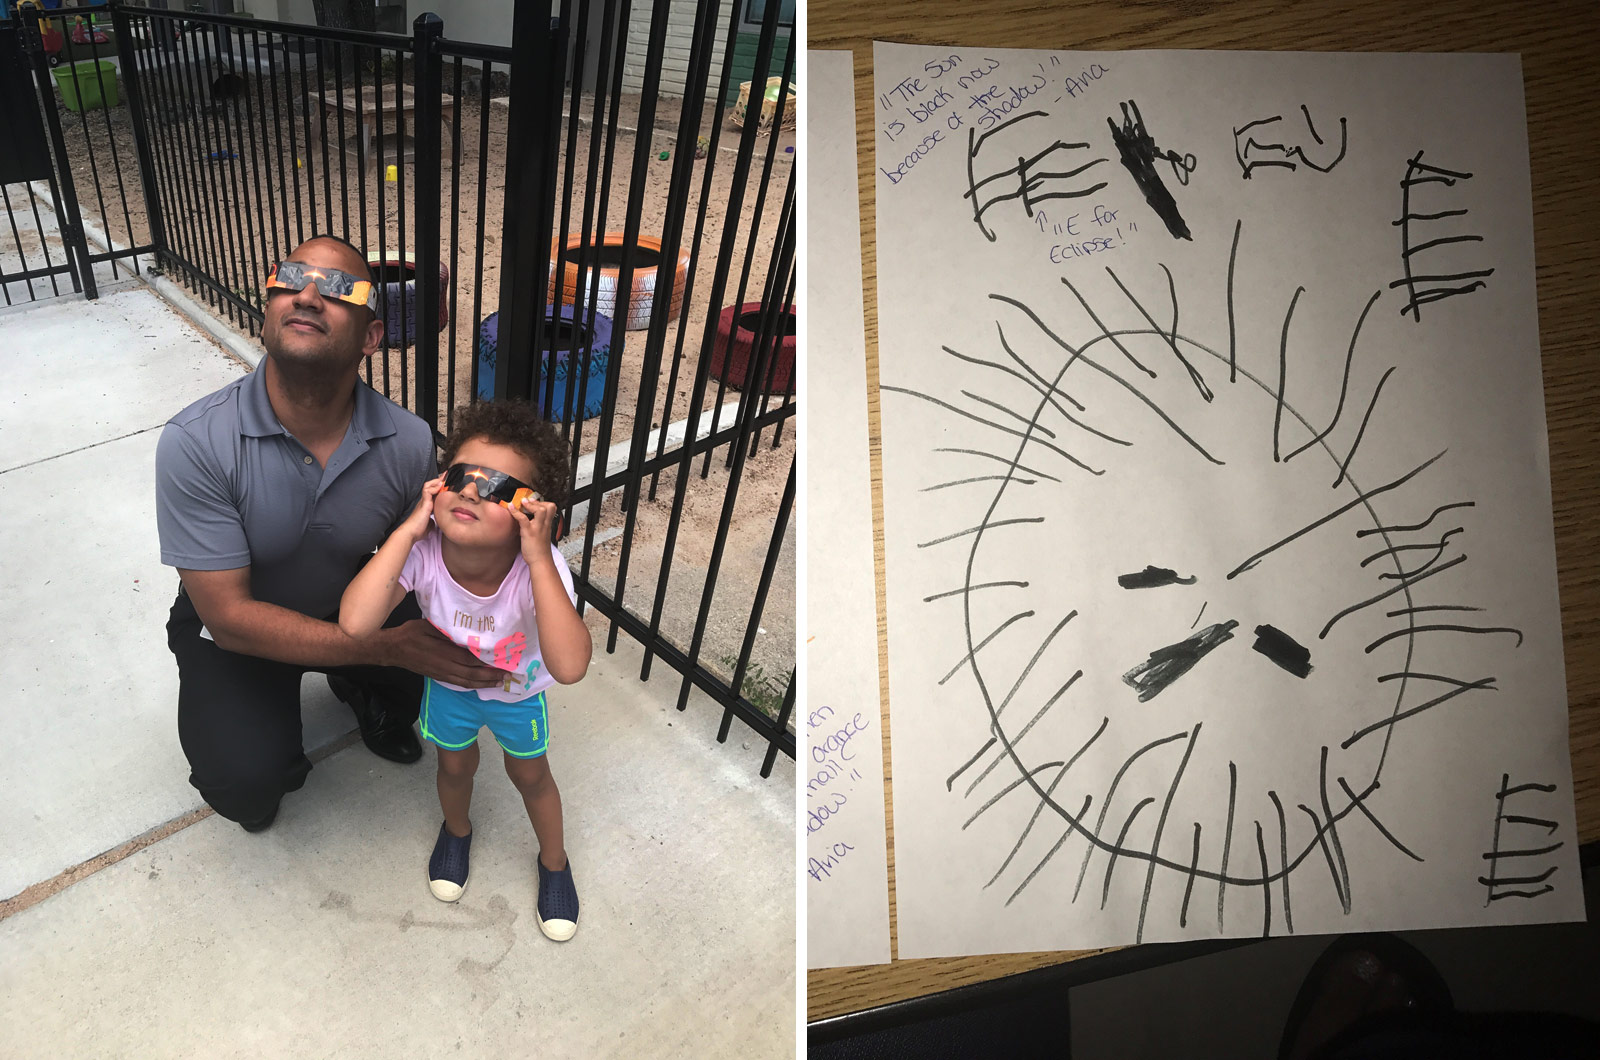 father and daughter viewing eclipse together and a painting of gravity